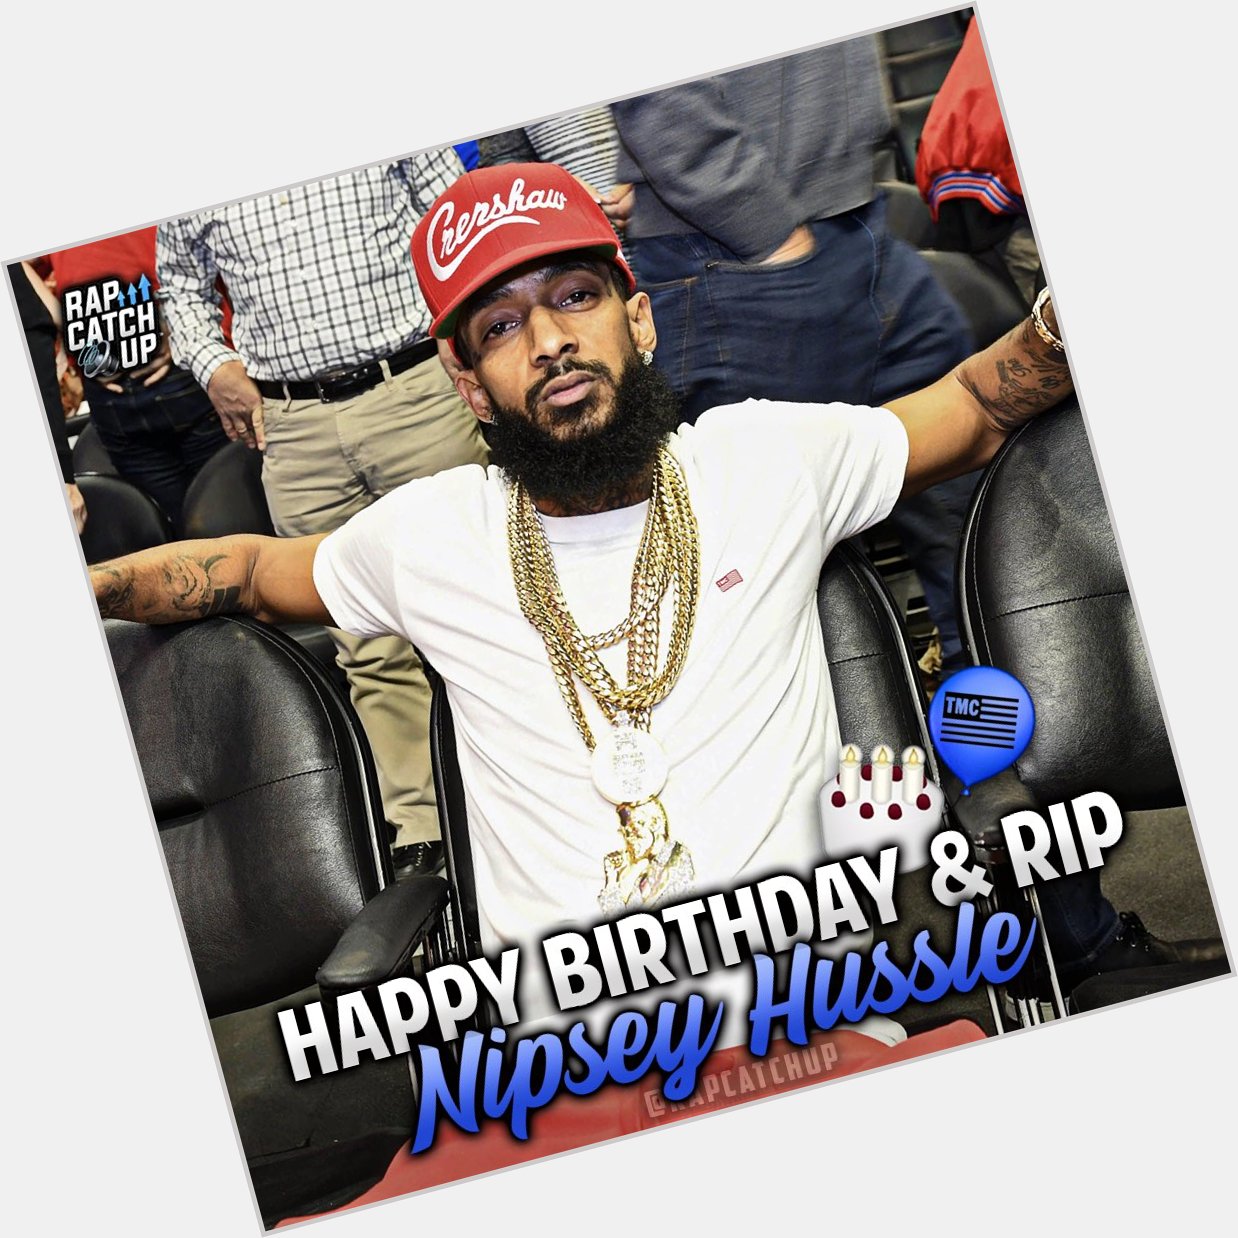 Happy Birthday & Rest In Peace to Ermias Nipsey Hussle Asghedom. Today would have been his 36th Birthday   